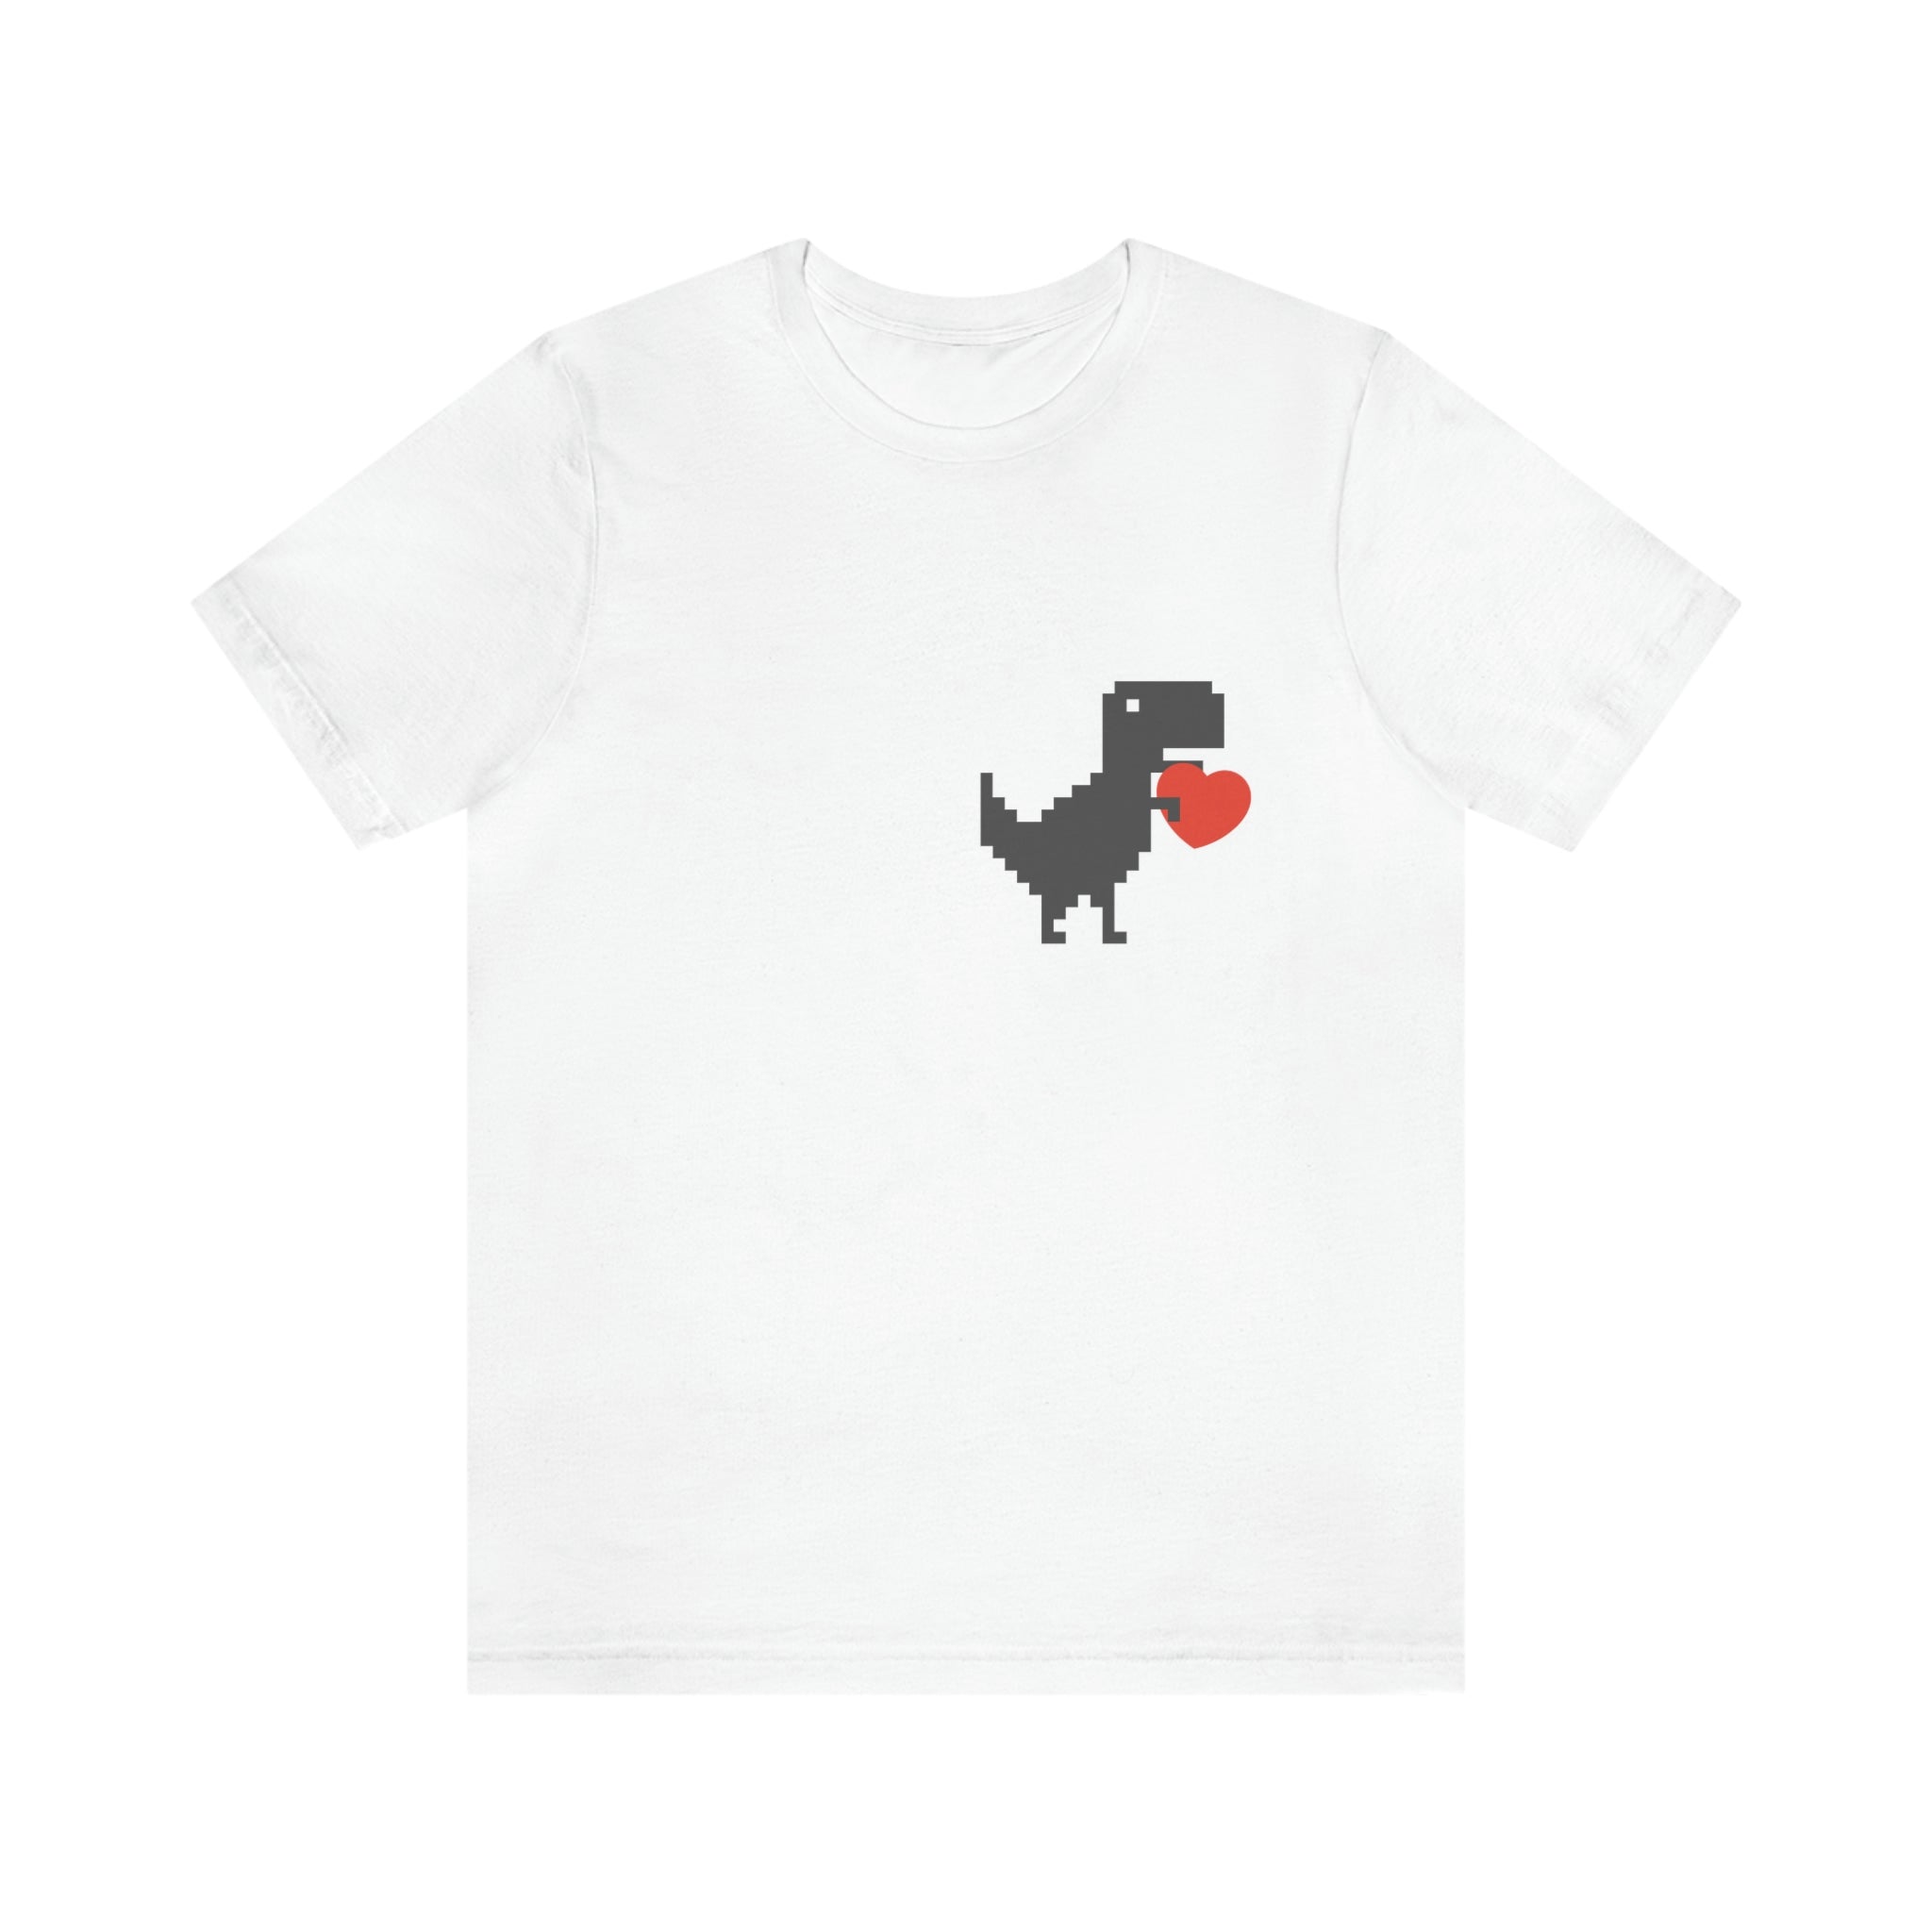 Larry the Dino Loves You! : Unisex 100% Cotton T-Shirt by Bella+Canvas